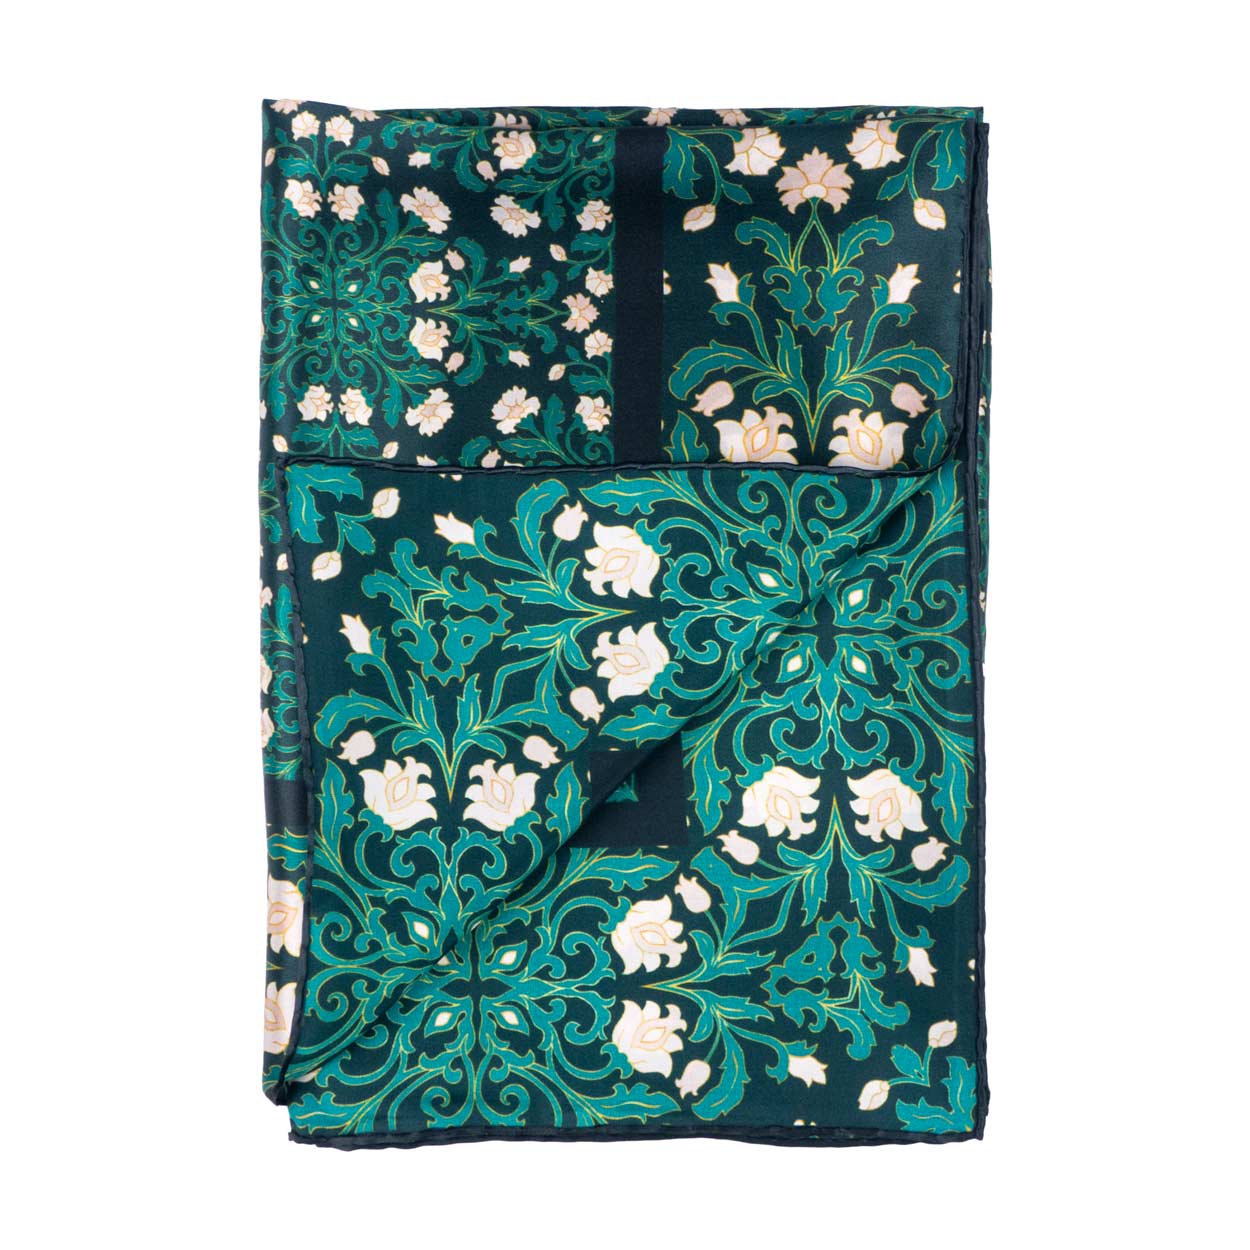 Details of green scarf with floral print inspired by Art Nouveau